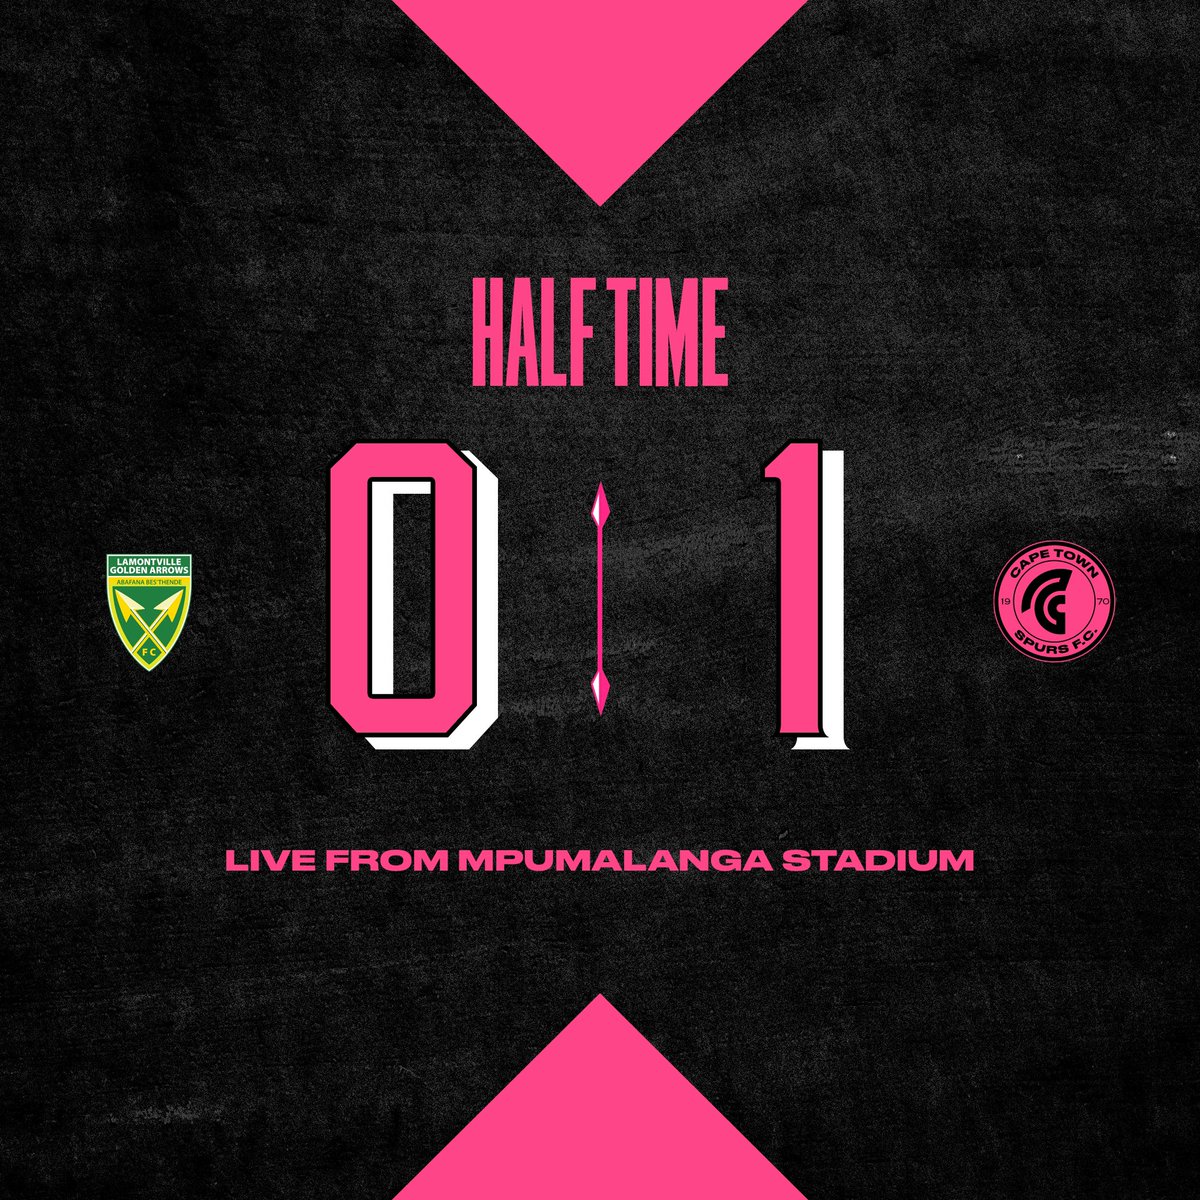 Warriors are in the lead at the break… #CAPETOWNSPURS #URBANWARRIORS #PSL #DSTVPREMIERSHIP #OURYOUTHOURFUTURE #CAPETOWN #SOUTHAFRICA